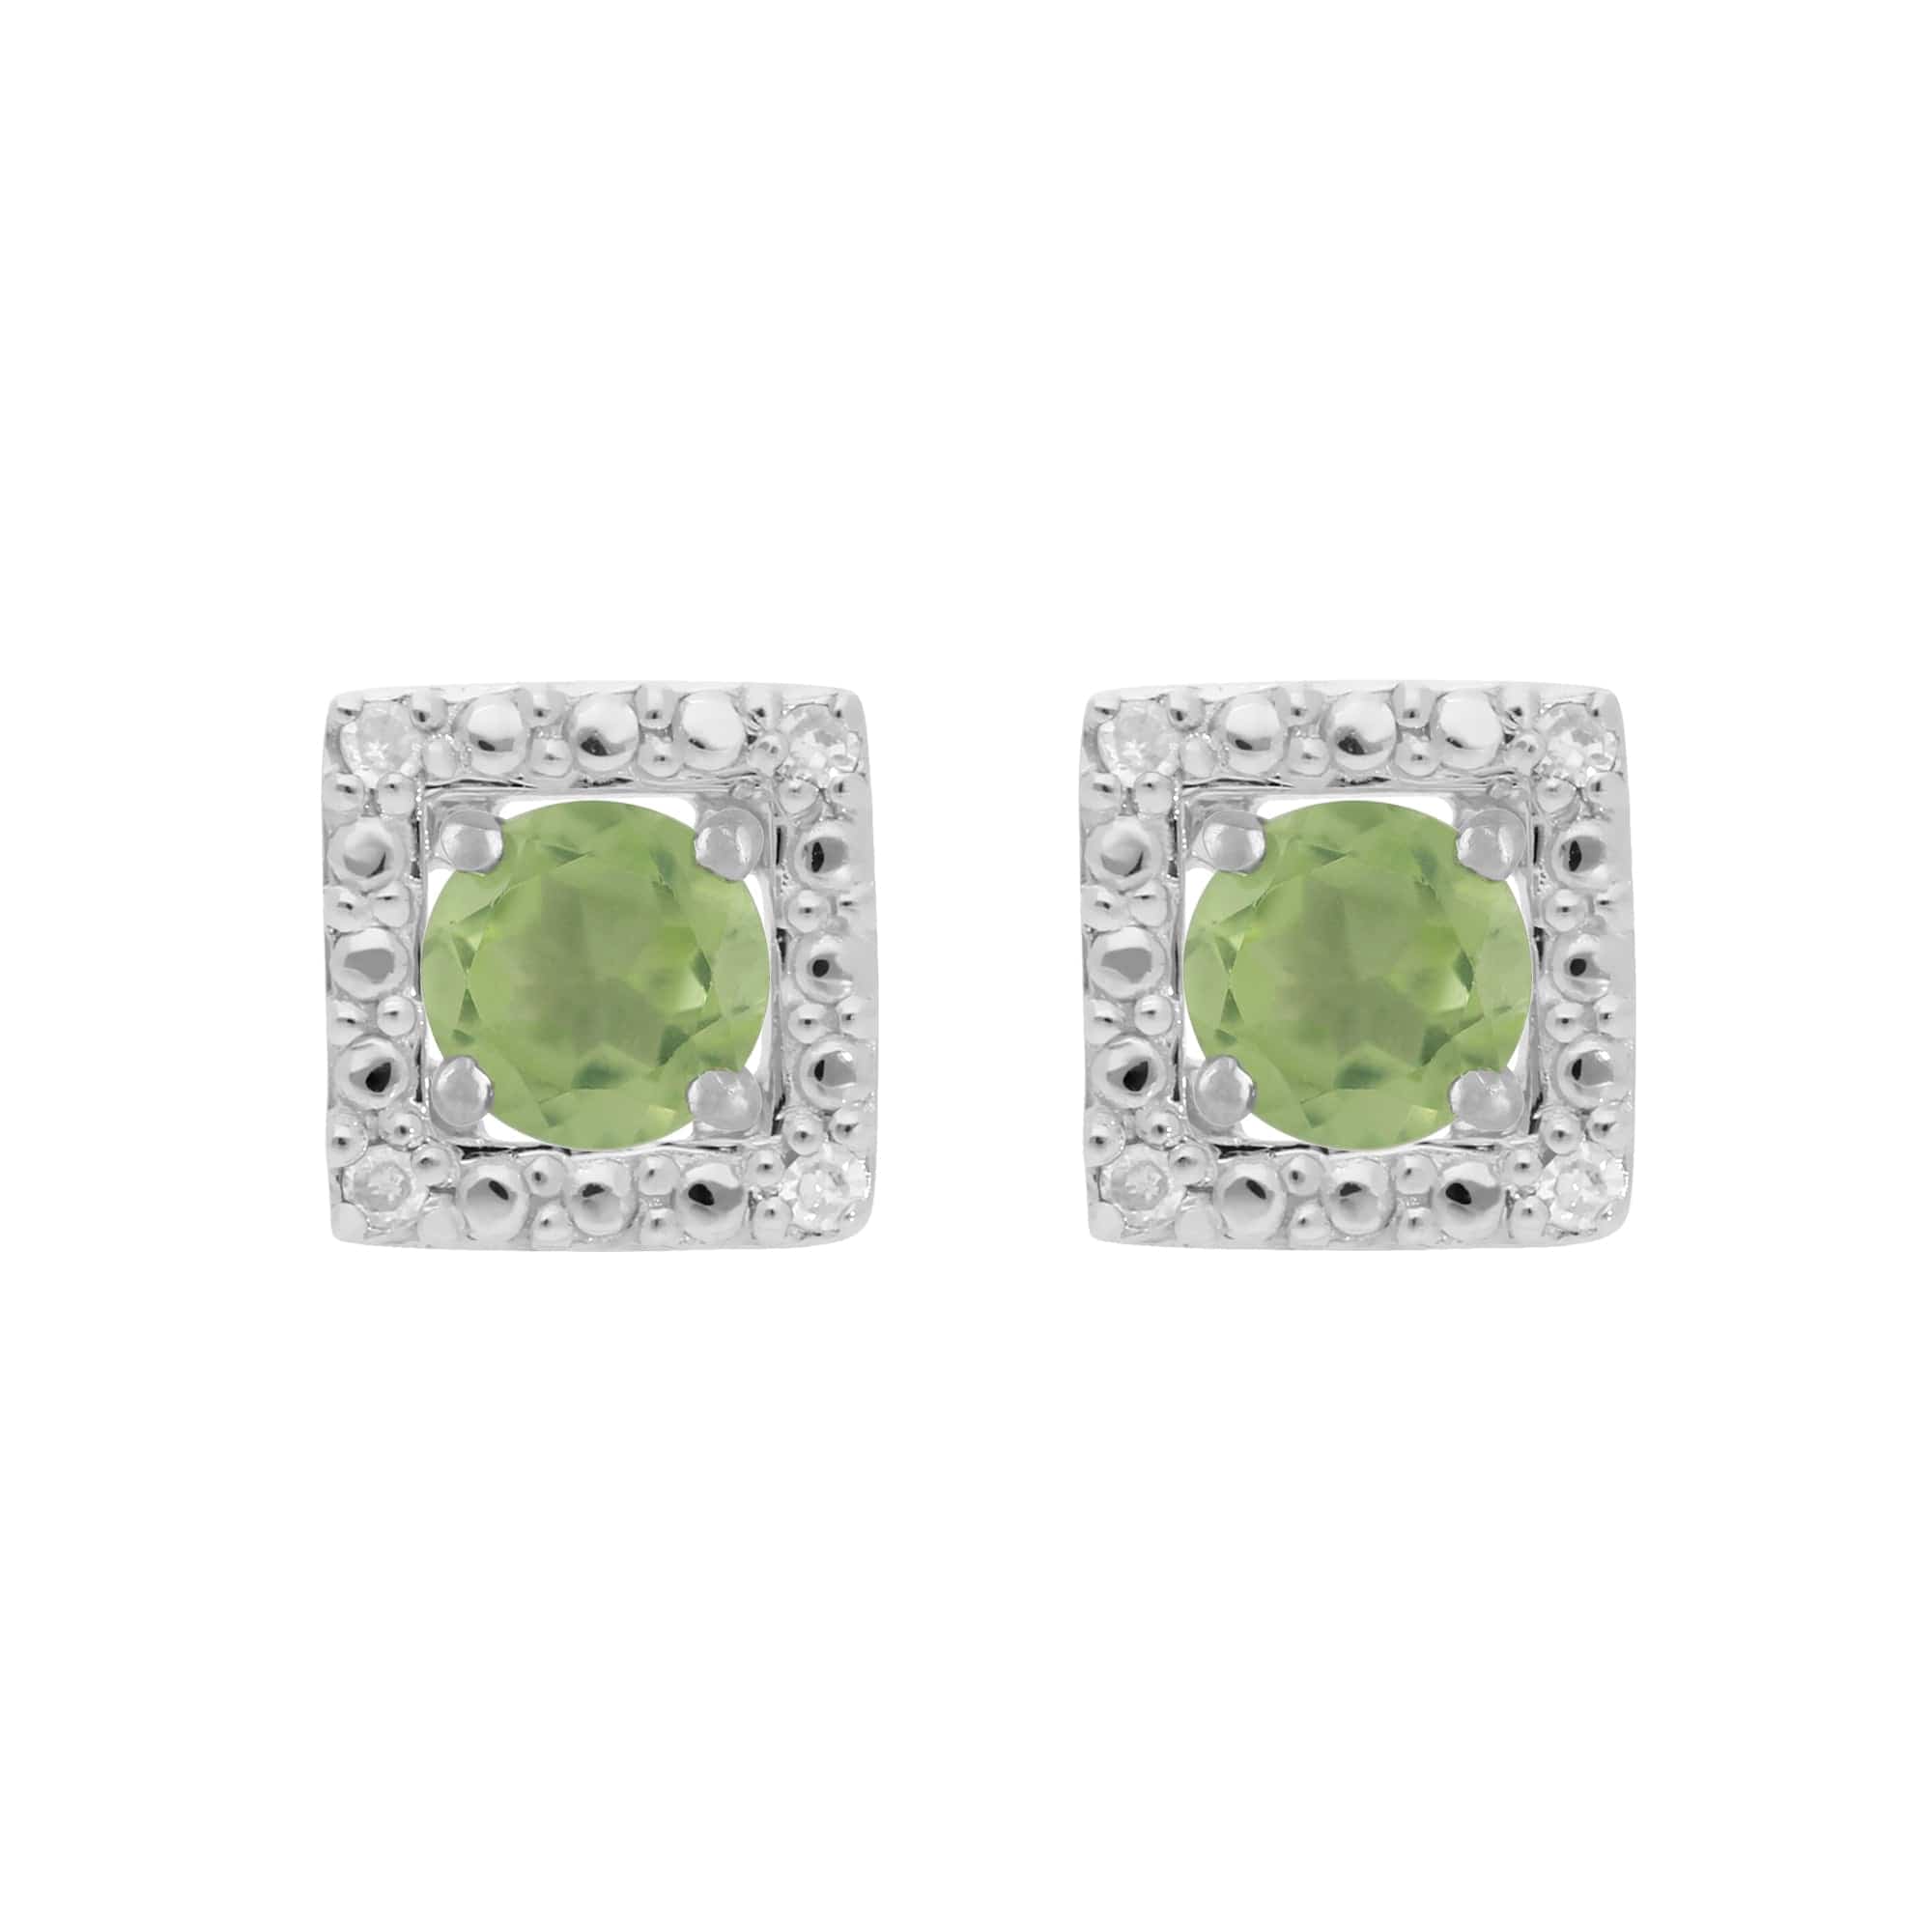 11614-162E0245019 Classic Round Peridot Stud Earrings with Detachable Diamond Square Ear Jacket in 9ct White Gold 1